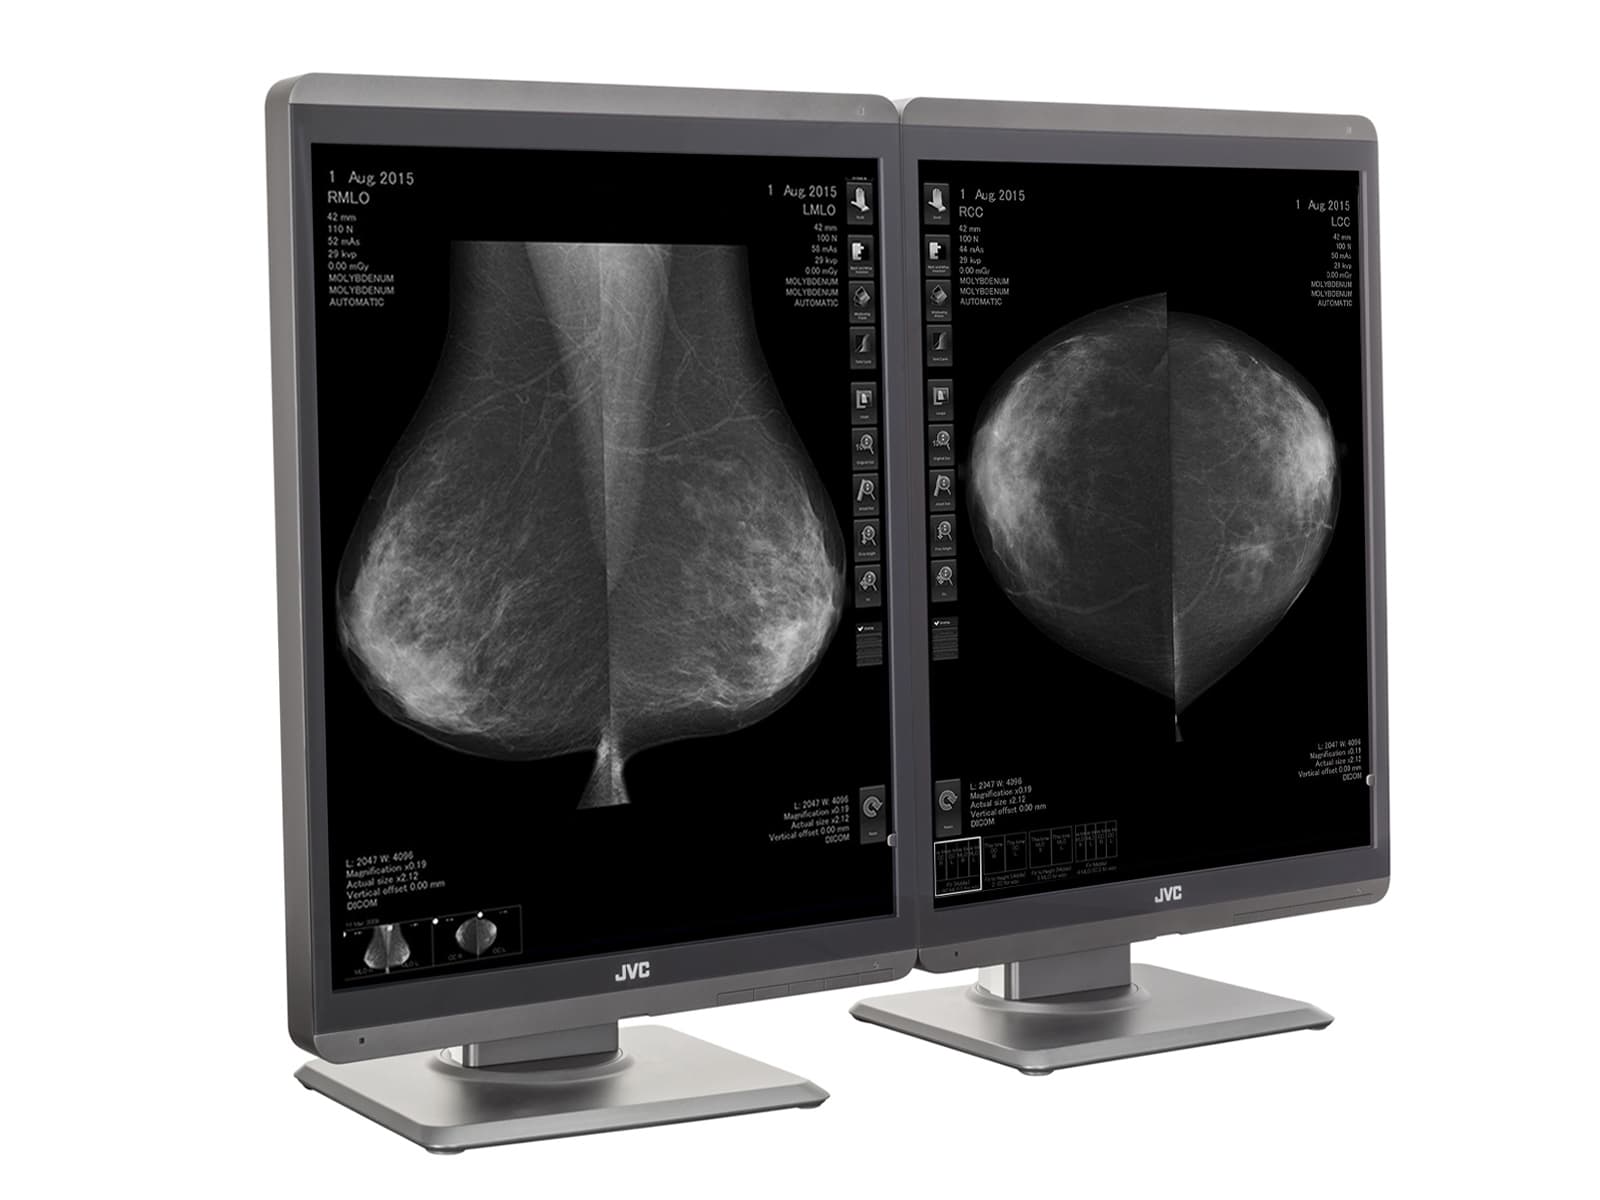 JVC Totoku MS-S500 5MP 21" Mammo 3D-DBT Grayscale LED Breast Imaging Display (MS-S500) Monitors.com 